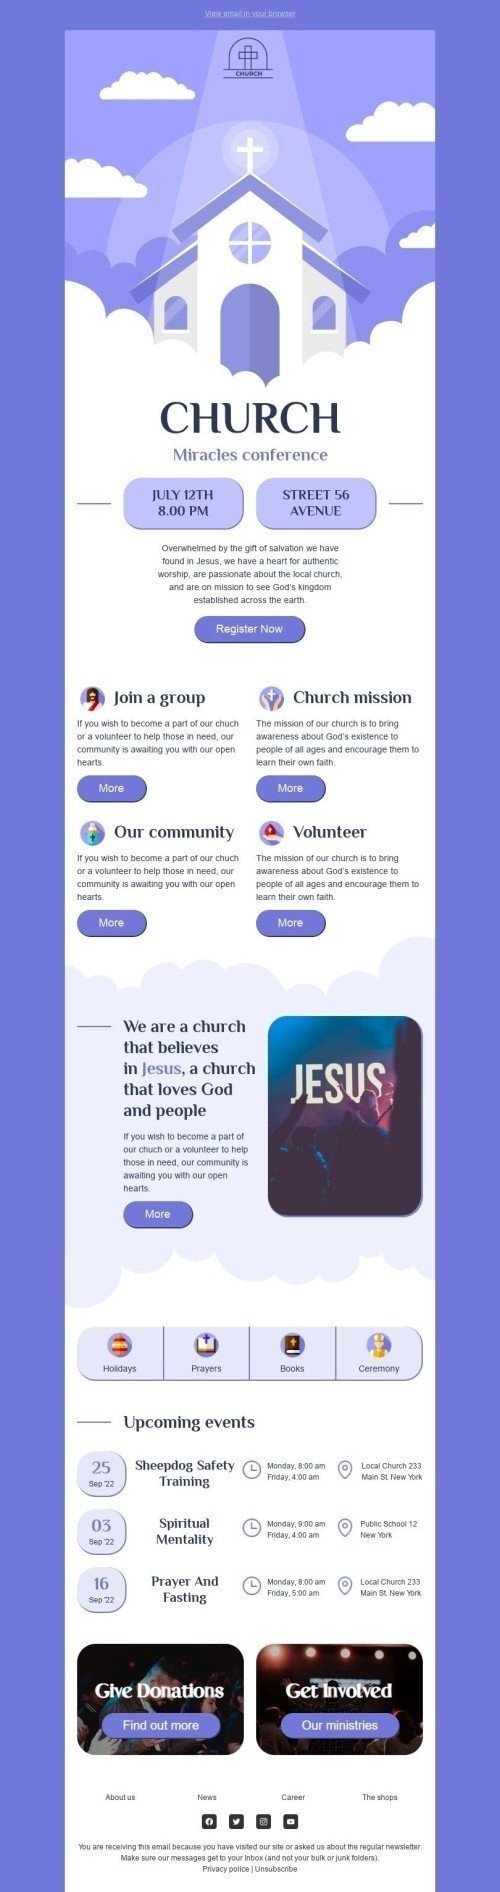 Promo Email Template "Miracles conference" for Church industry desktop view